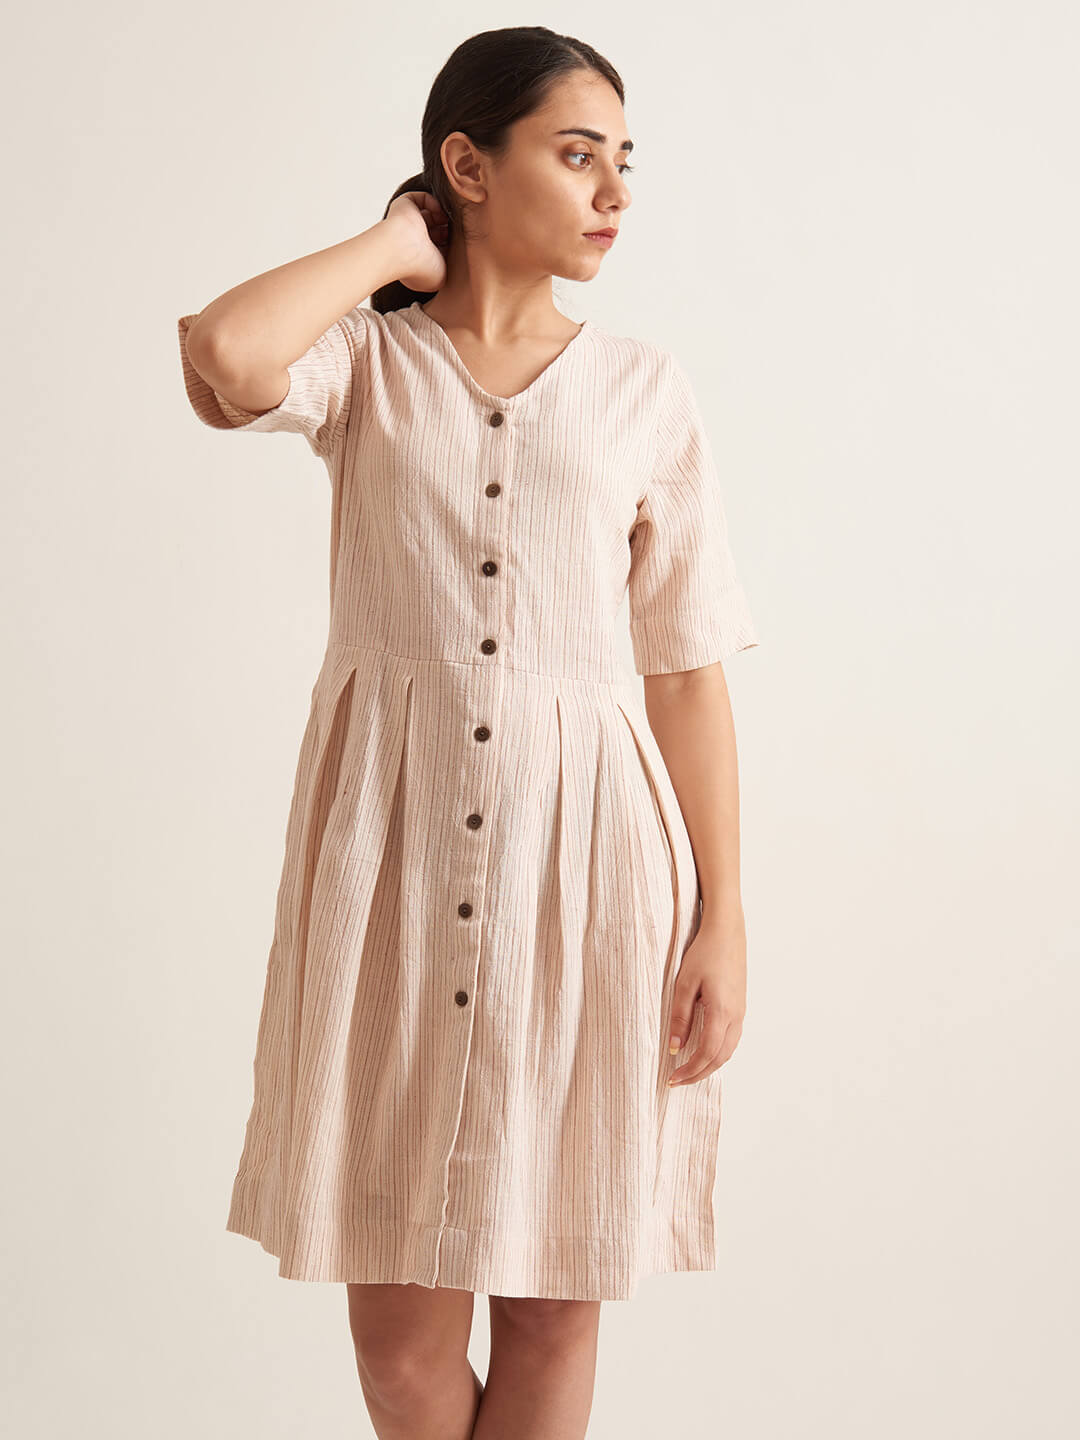 Box Pleat Shirt Dress – Contemporary style, crafted for longevity.